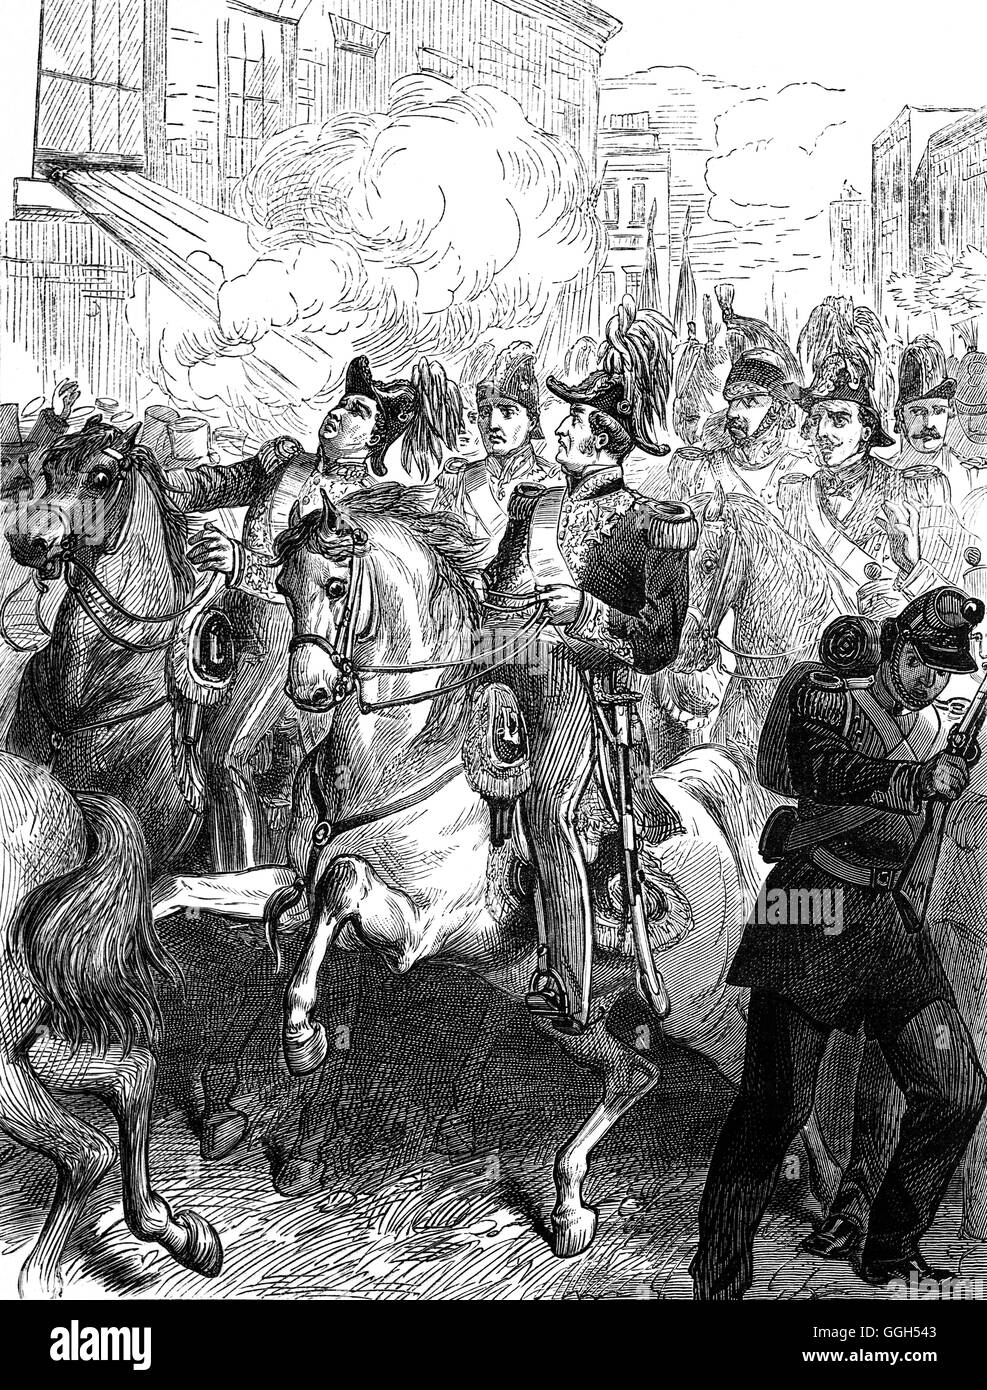 On 28 July 1835, King Louis Philippe survived an assassination attempt during the king's annual review of the Paris National Guard commemorating the revolution.  Giuseppe Mario attacked the procession with a self built weapon,  that later became known as the Machine infernale, that consisted of 25 gun barrels fastened to a wooden frame that could be fired  simultaneously. A ball only grazed the King's forehead, but 18 people were killed. Stock Photo